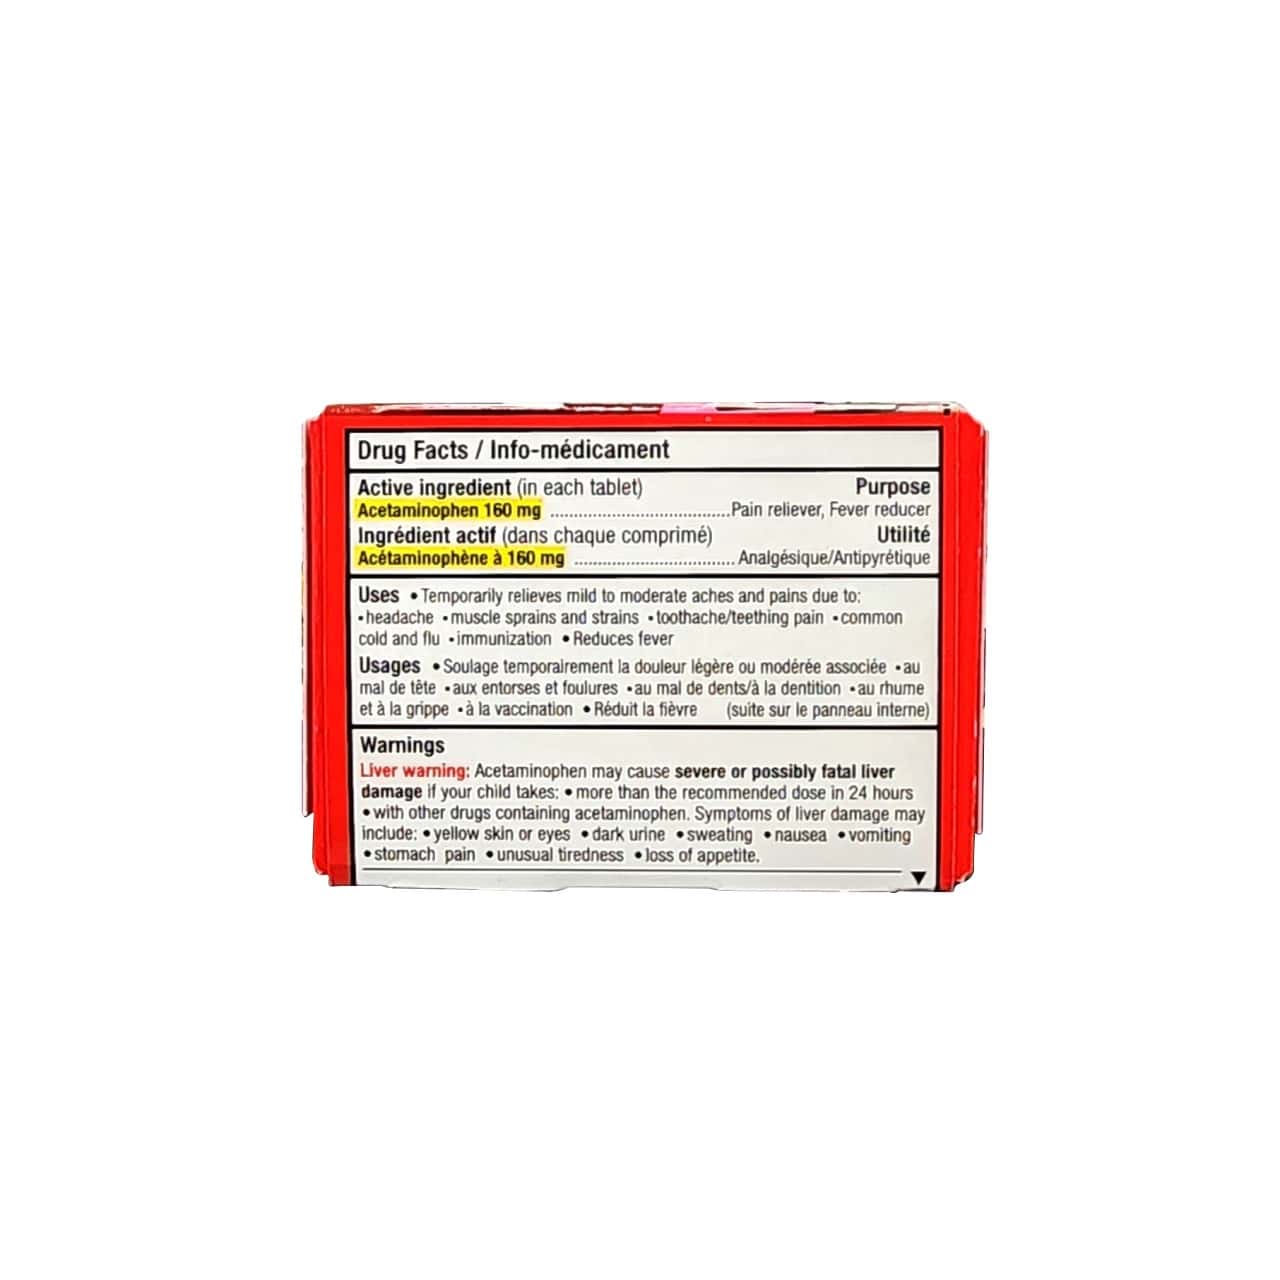 Ingredients, uses, warnings for Children's Tylenol Acetaminophen Fever and Pain Chewables Bubble Gum (Ages 2-11) (20 tablets)